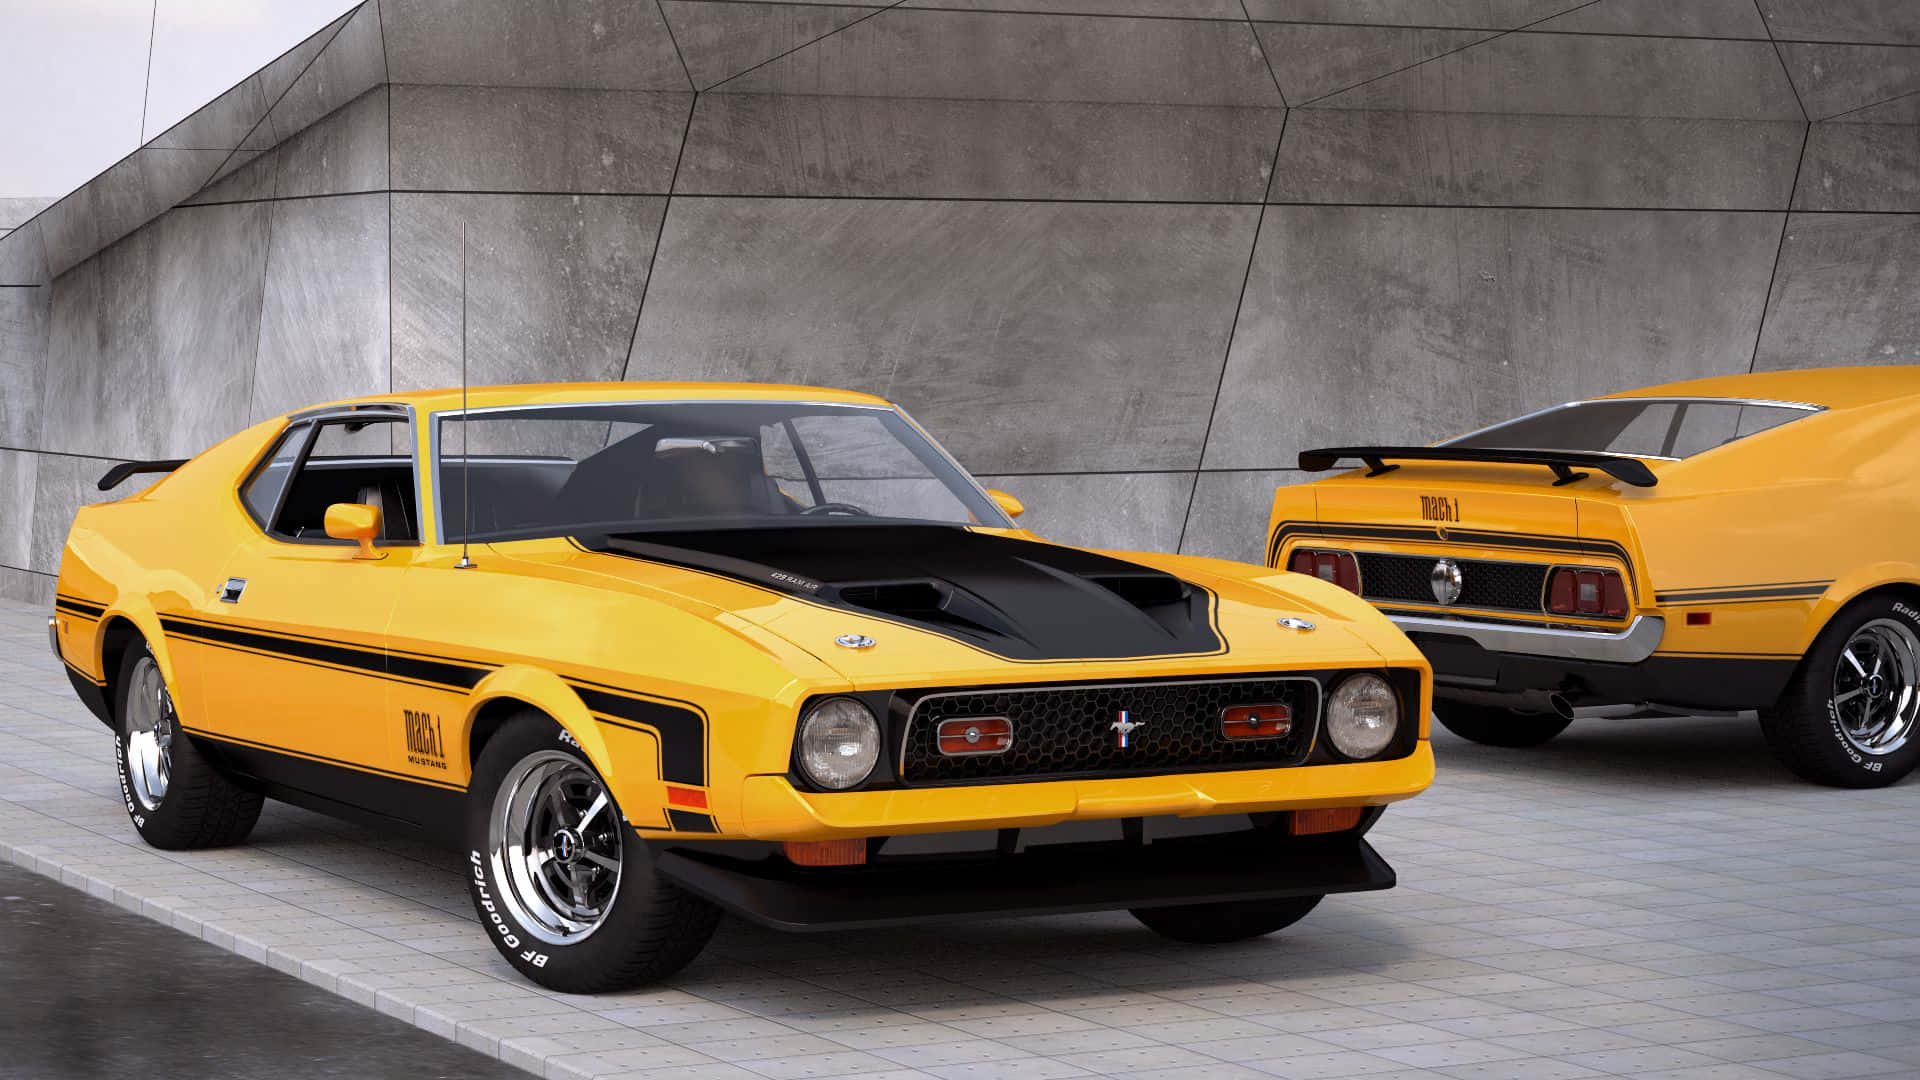 Sleek Ford Mustang Mach 1 in Action Wallpaper